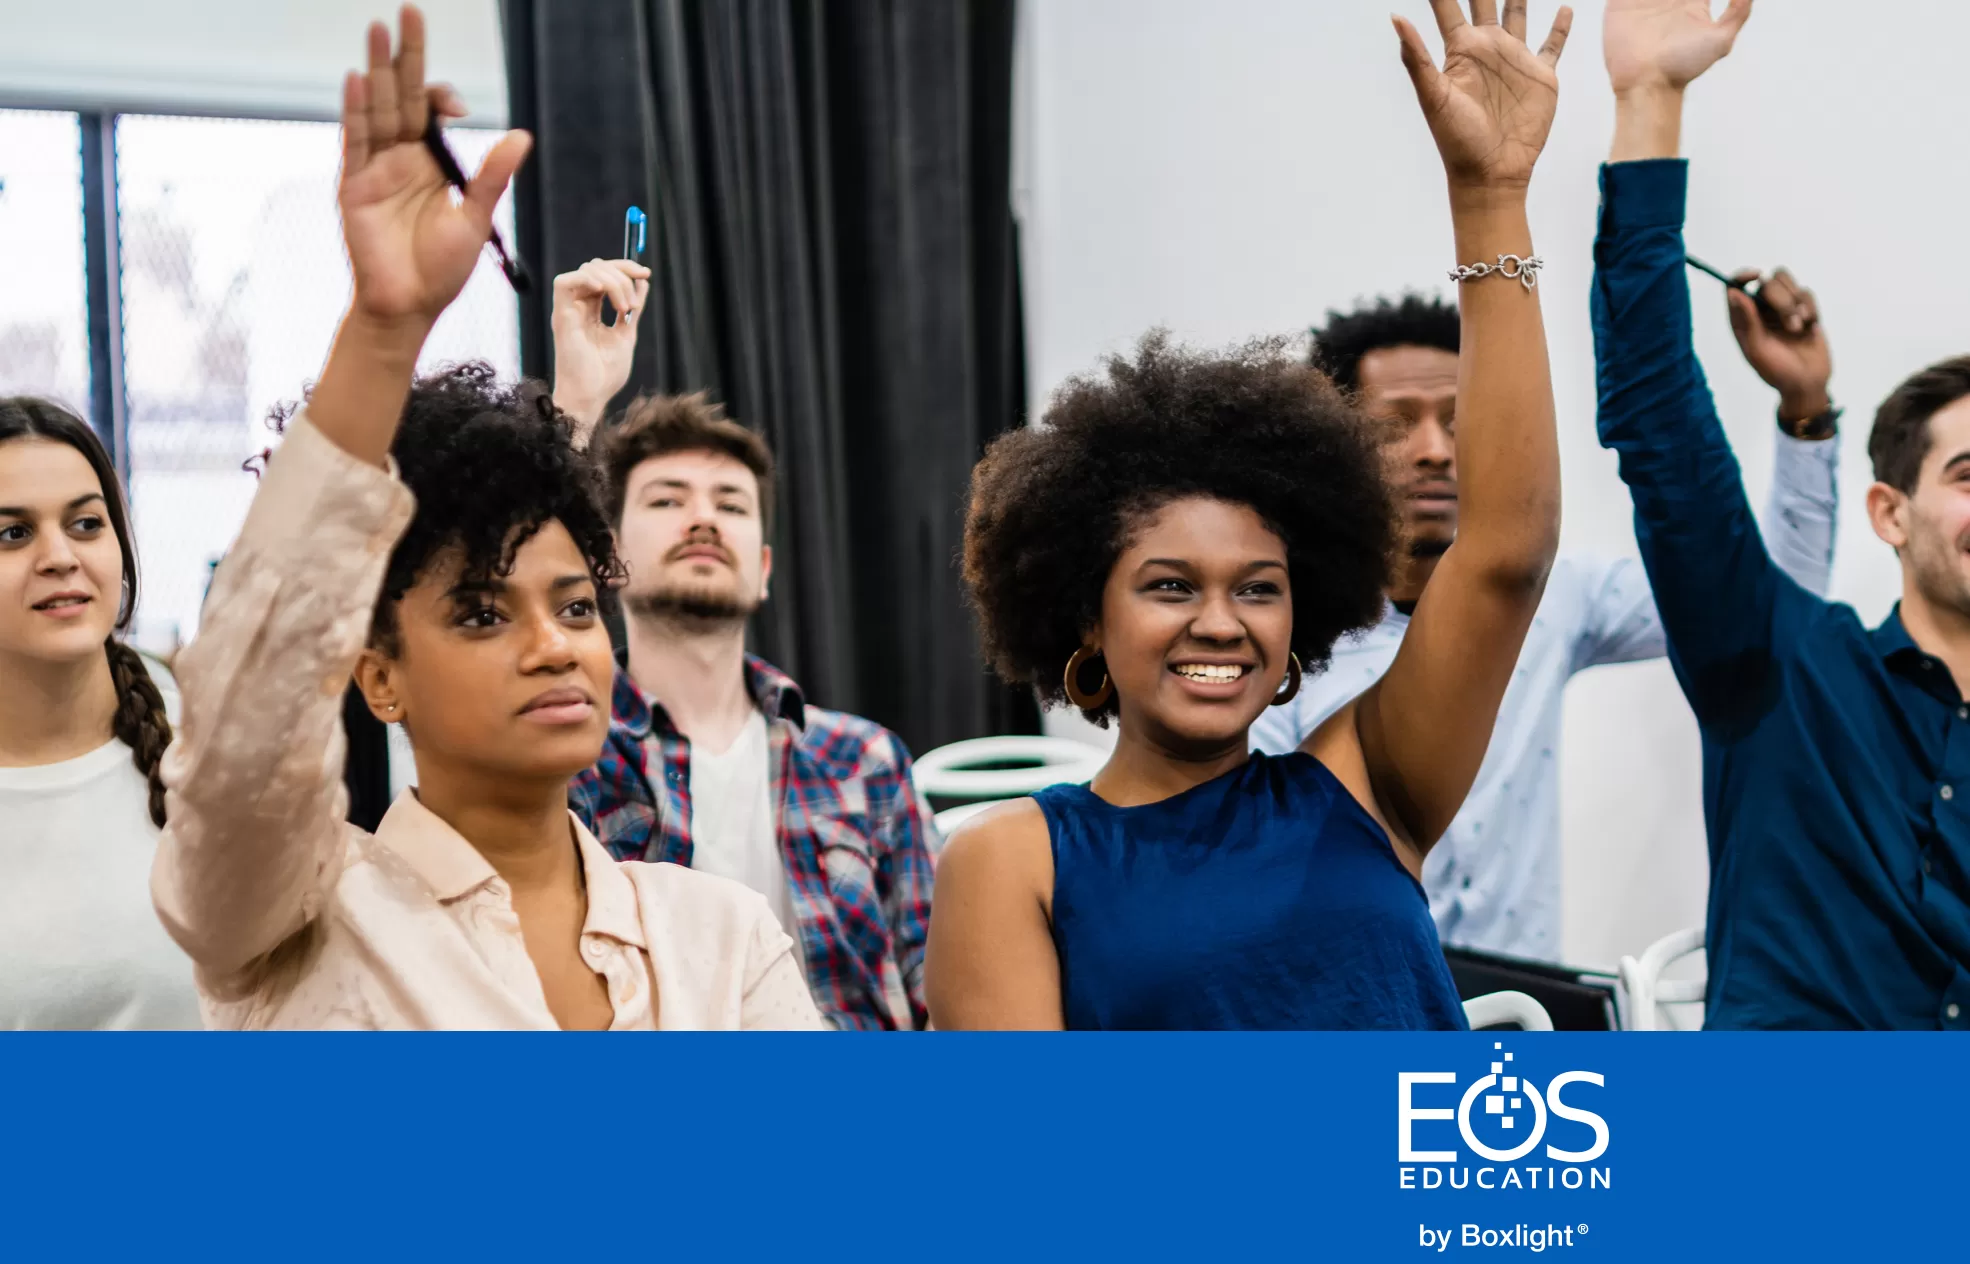 a group of people in a classroom raising their hands with a blue banner and the EOS logo along the bottom